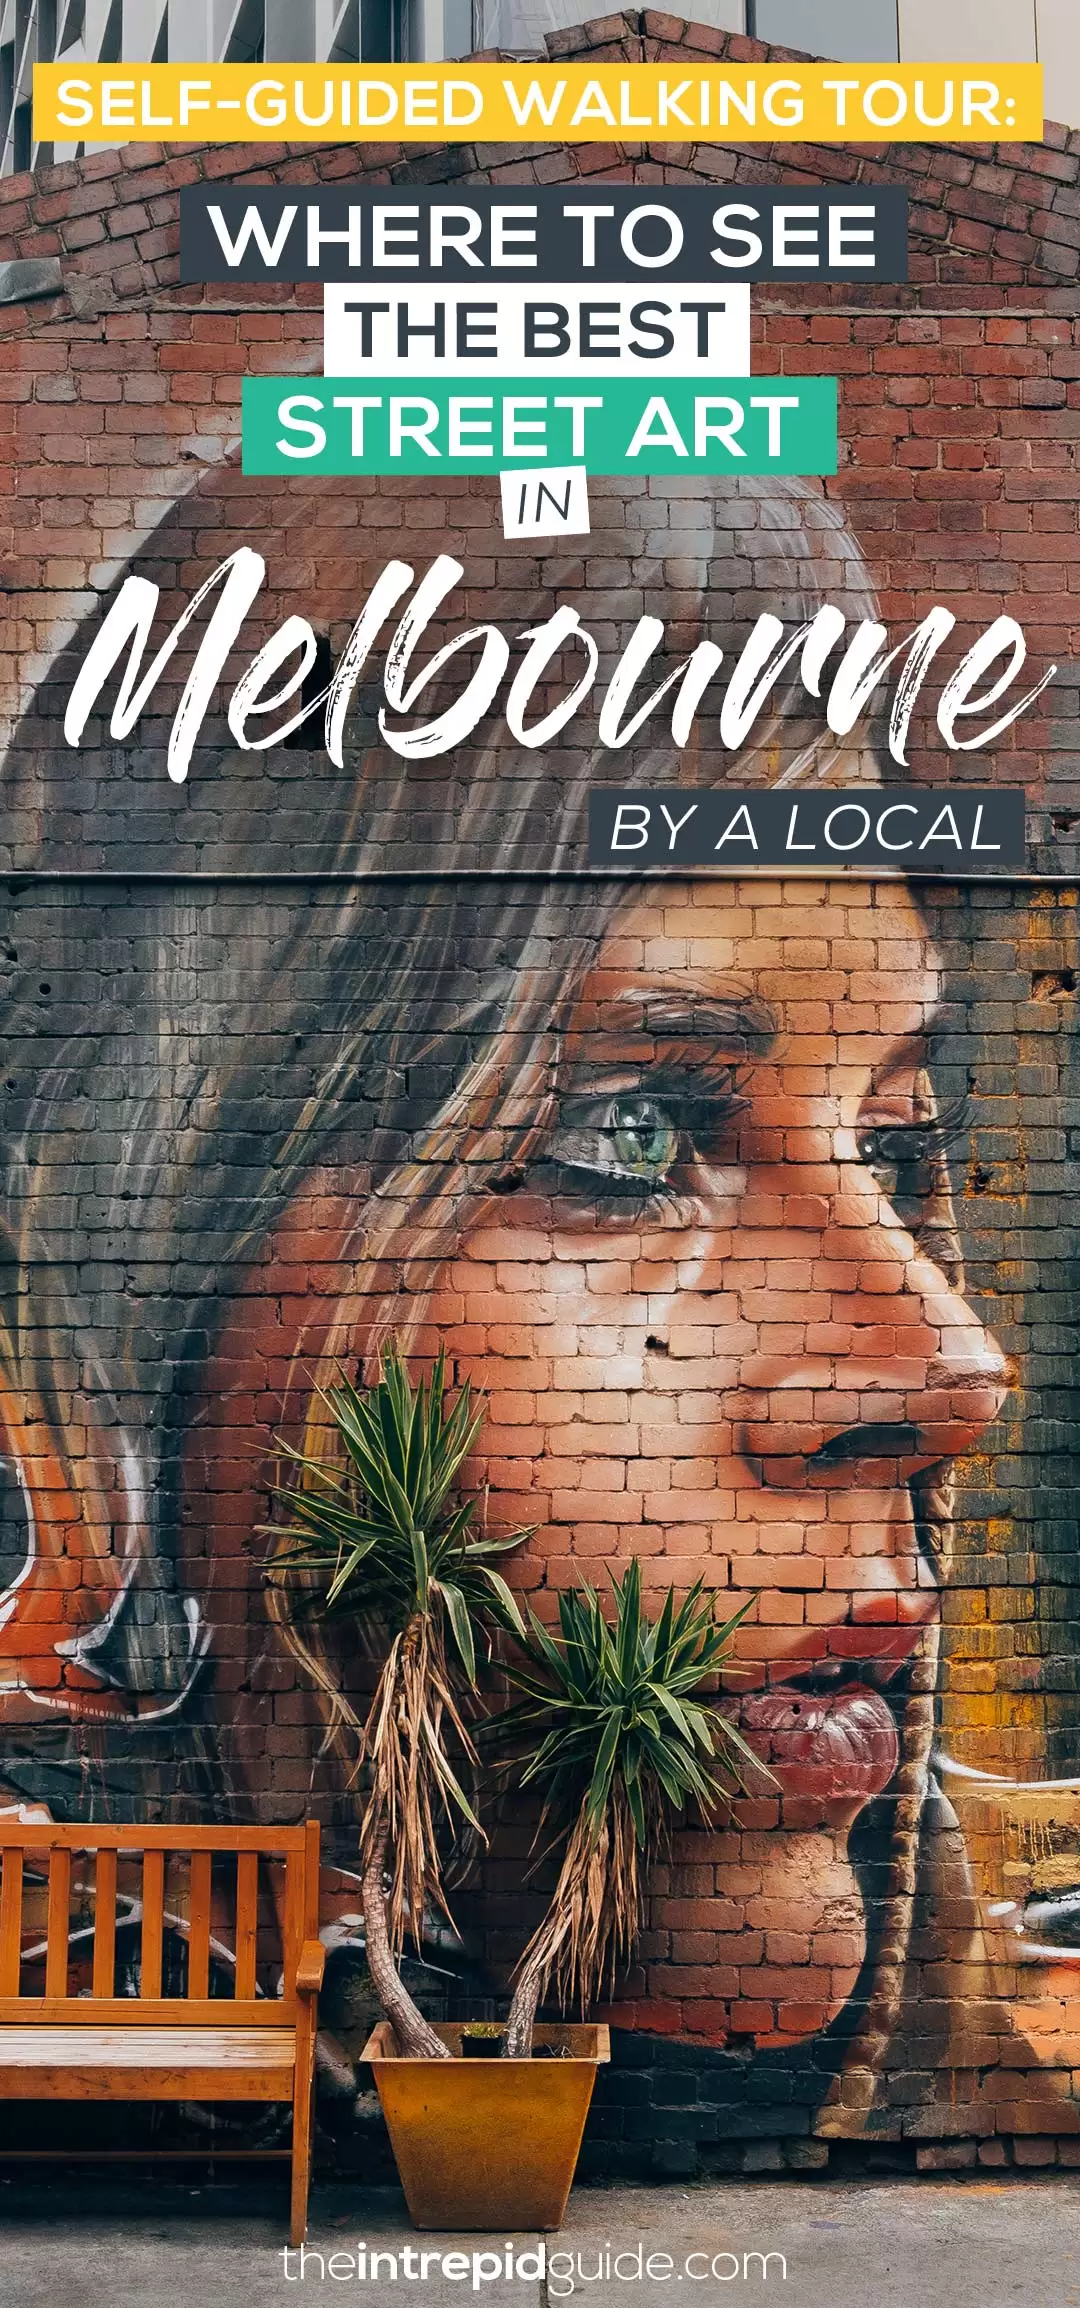 19 Best Melbourne Street Art Locations and Map - The Ultimate Guide by a Local